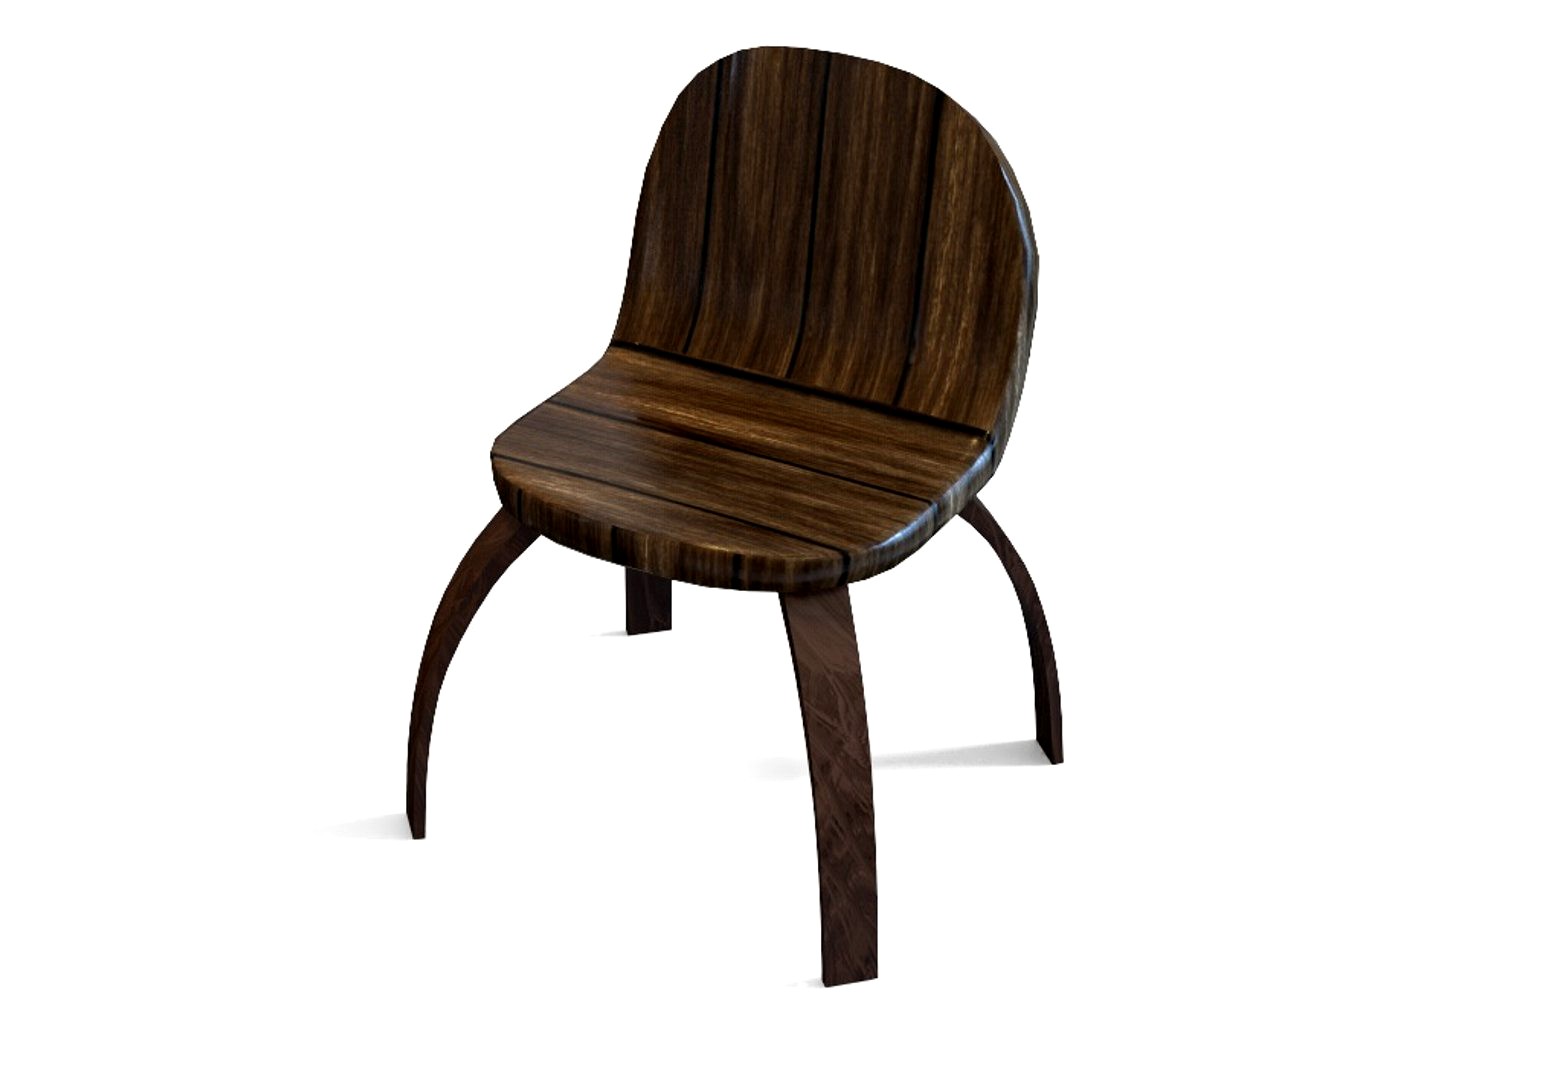 Funky Wooden Chair